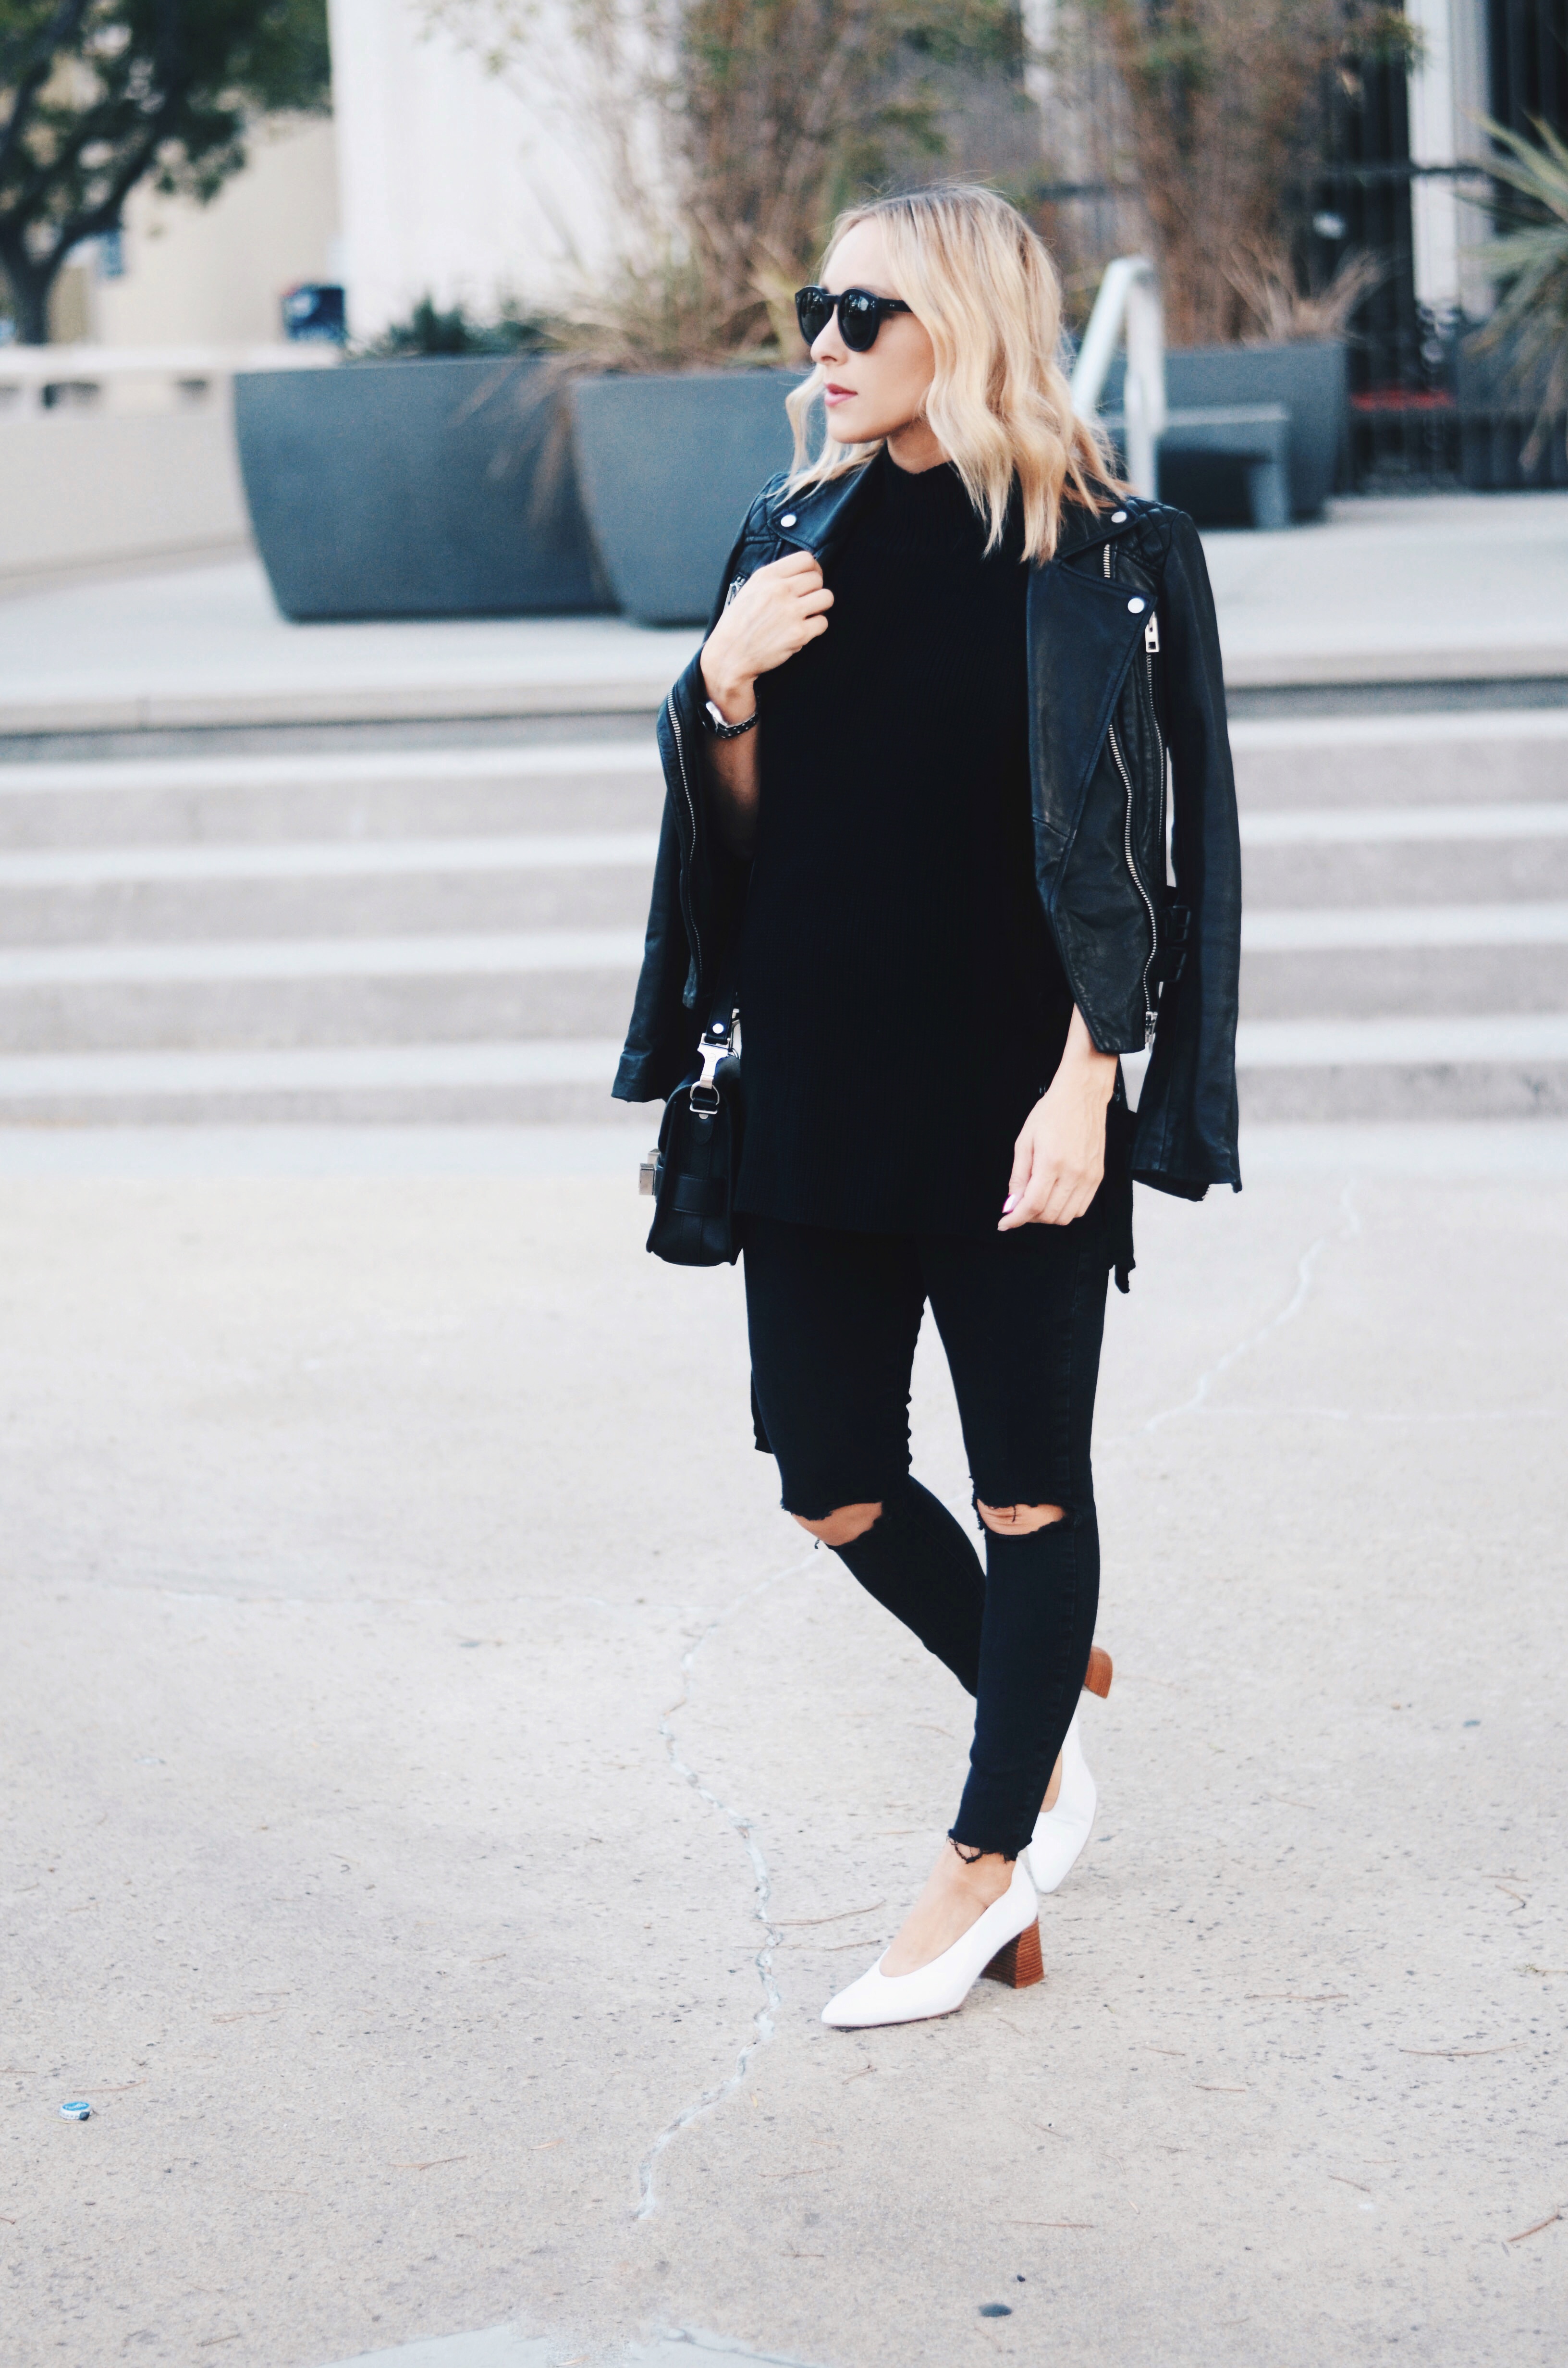 How to style a leather jacket for fall